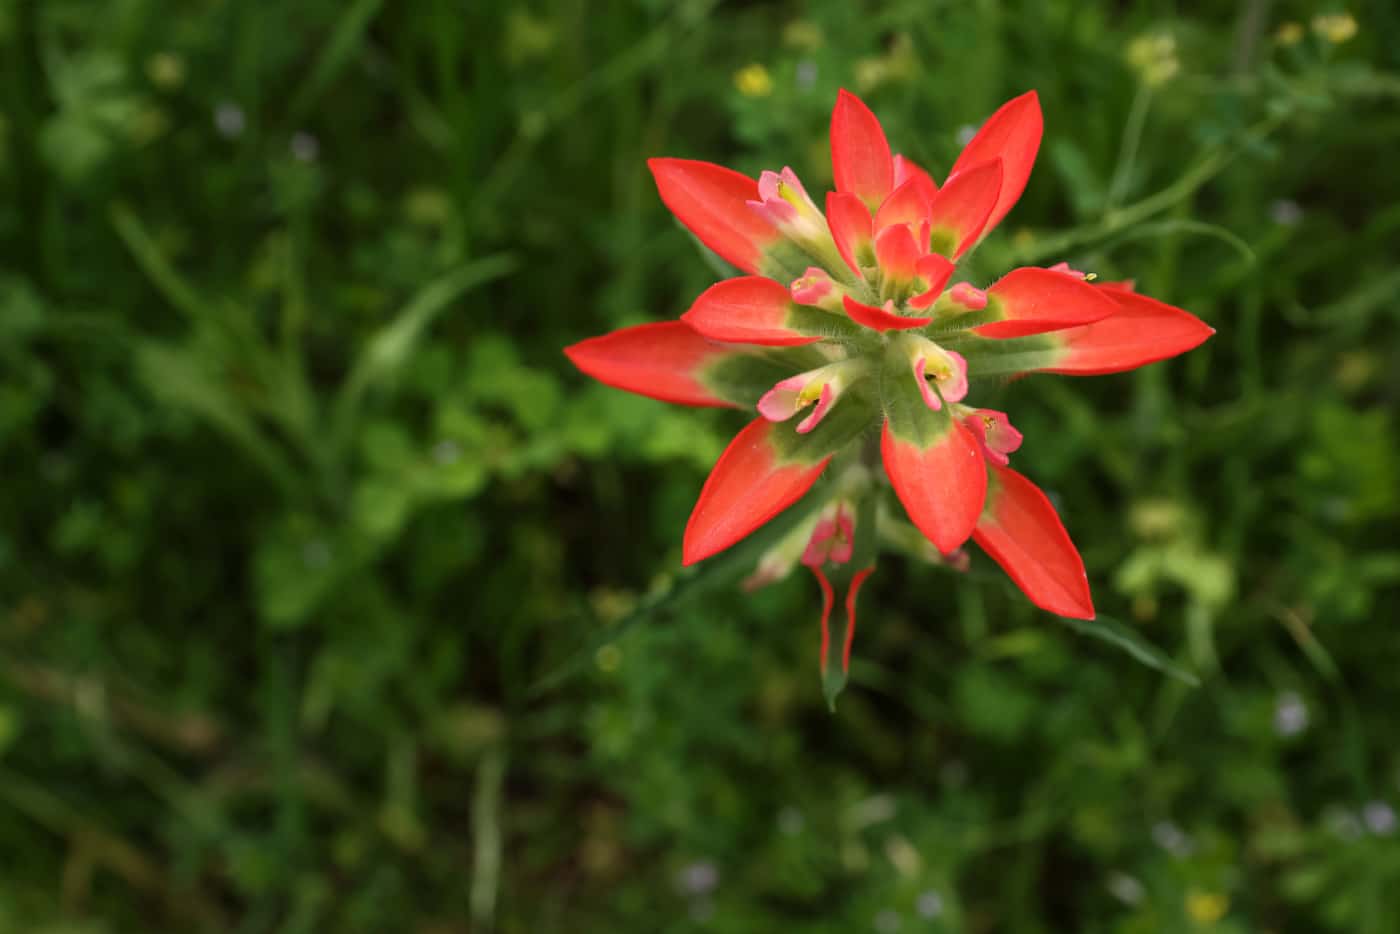 A Texas paintbrush blossoms at Goat Island Preserve in southern Dallas County.